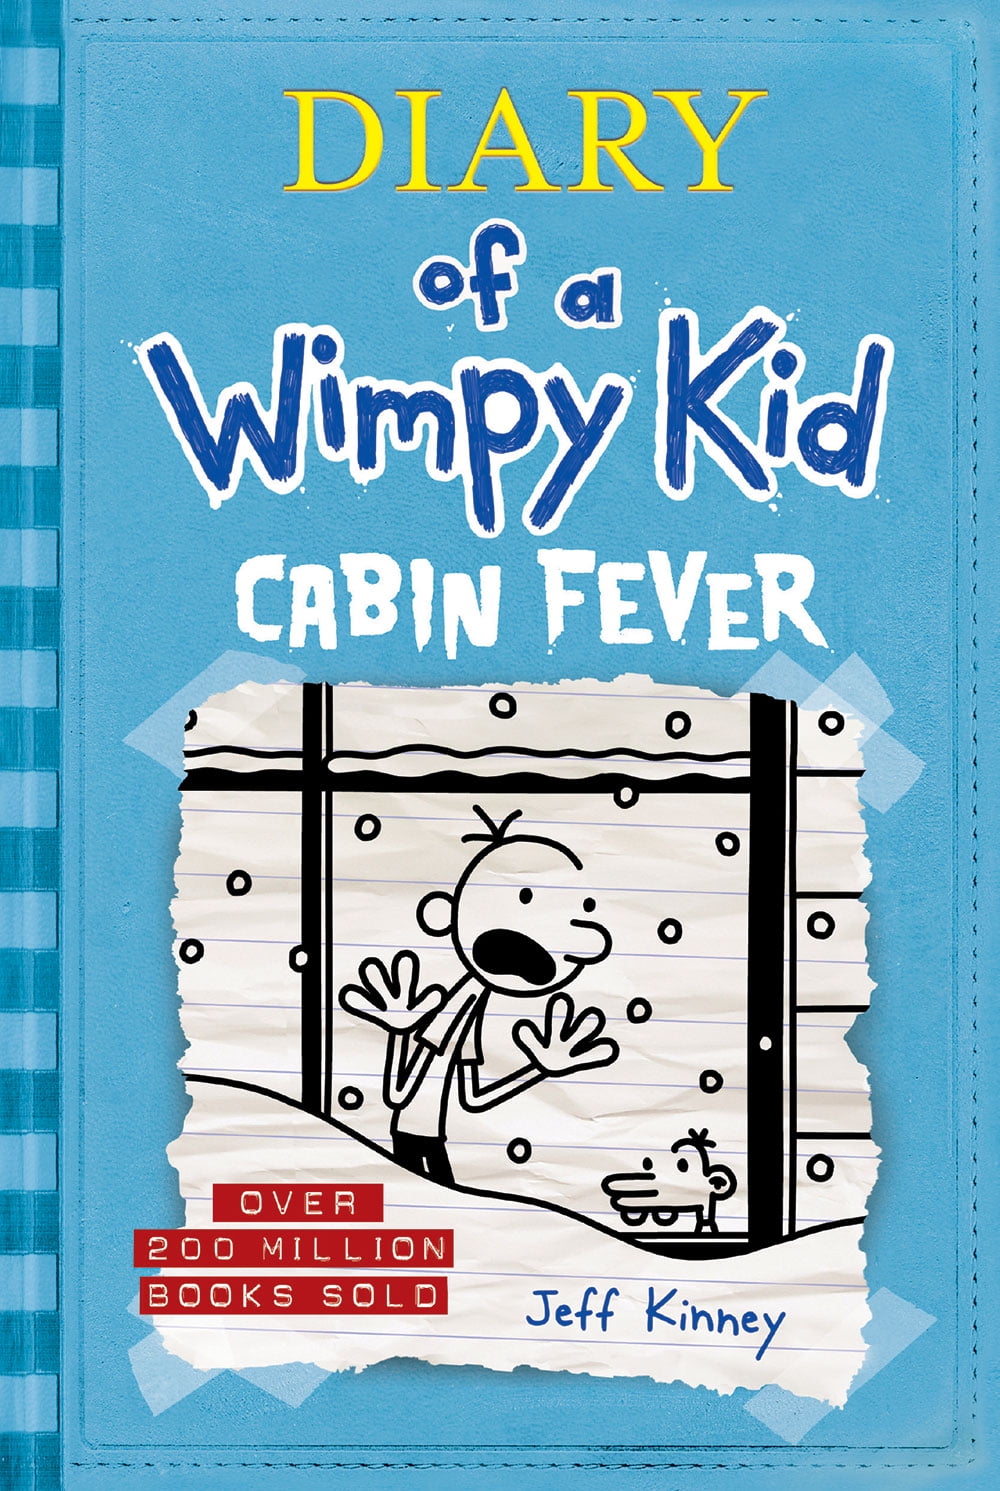 Jeff Kinney, author of Diary of a Wimpy Kid is coming to town on